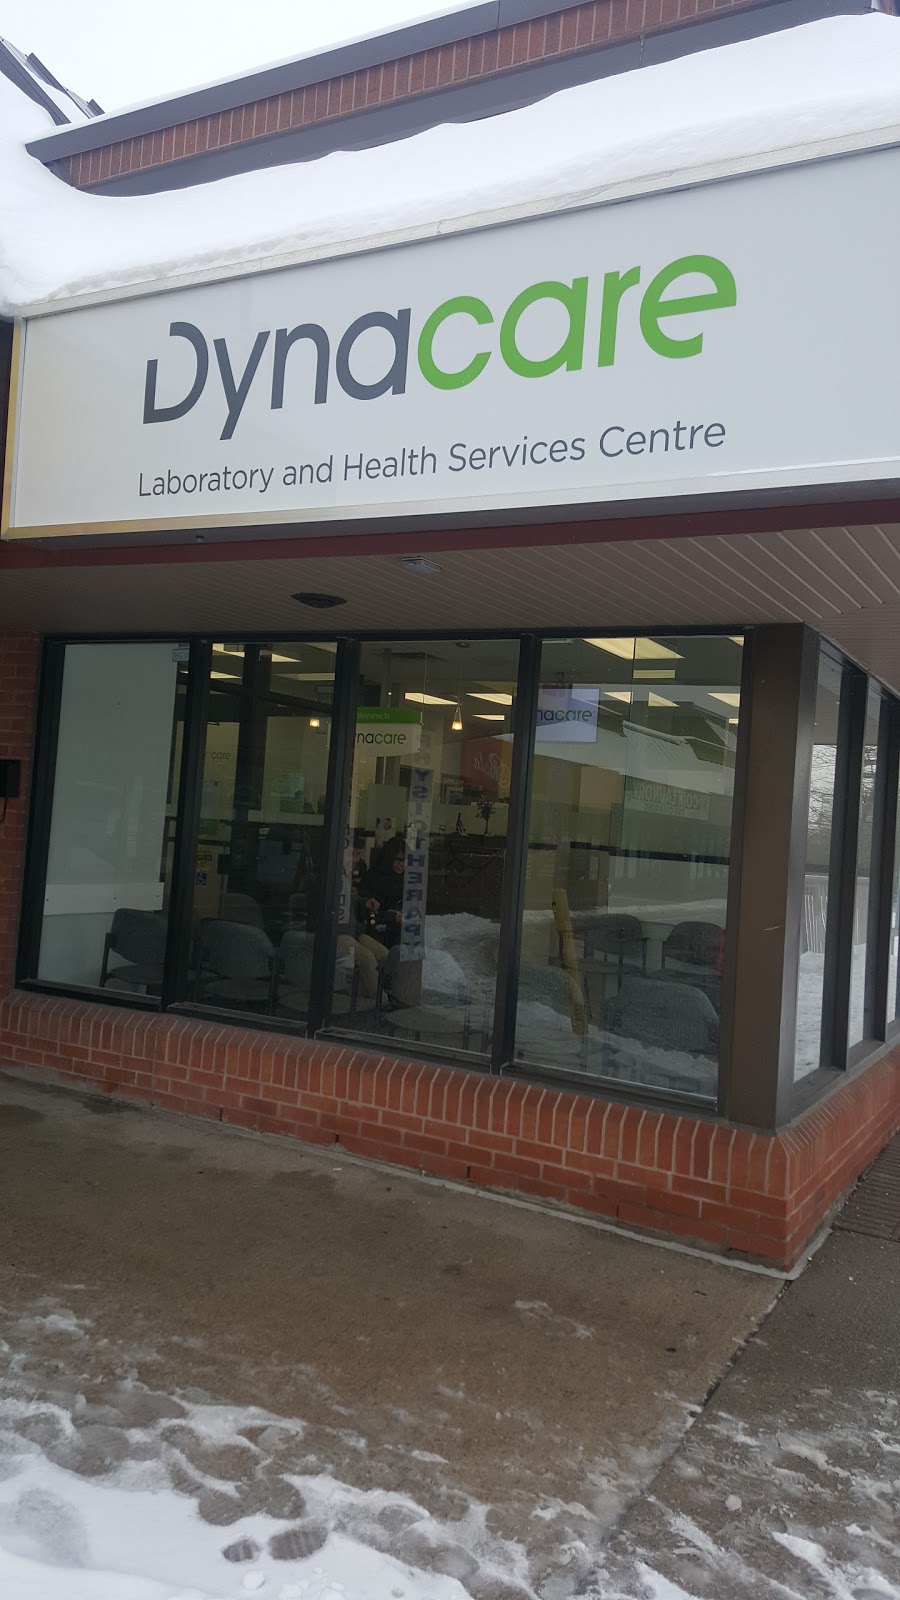 Dynacare Laboratory and Health Services Centre | health | 2325 Hurontario St #19, Mississauga, ON L5A 4C7, Canada | 9055669303 OR +1 905-566-9303